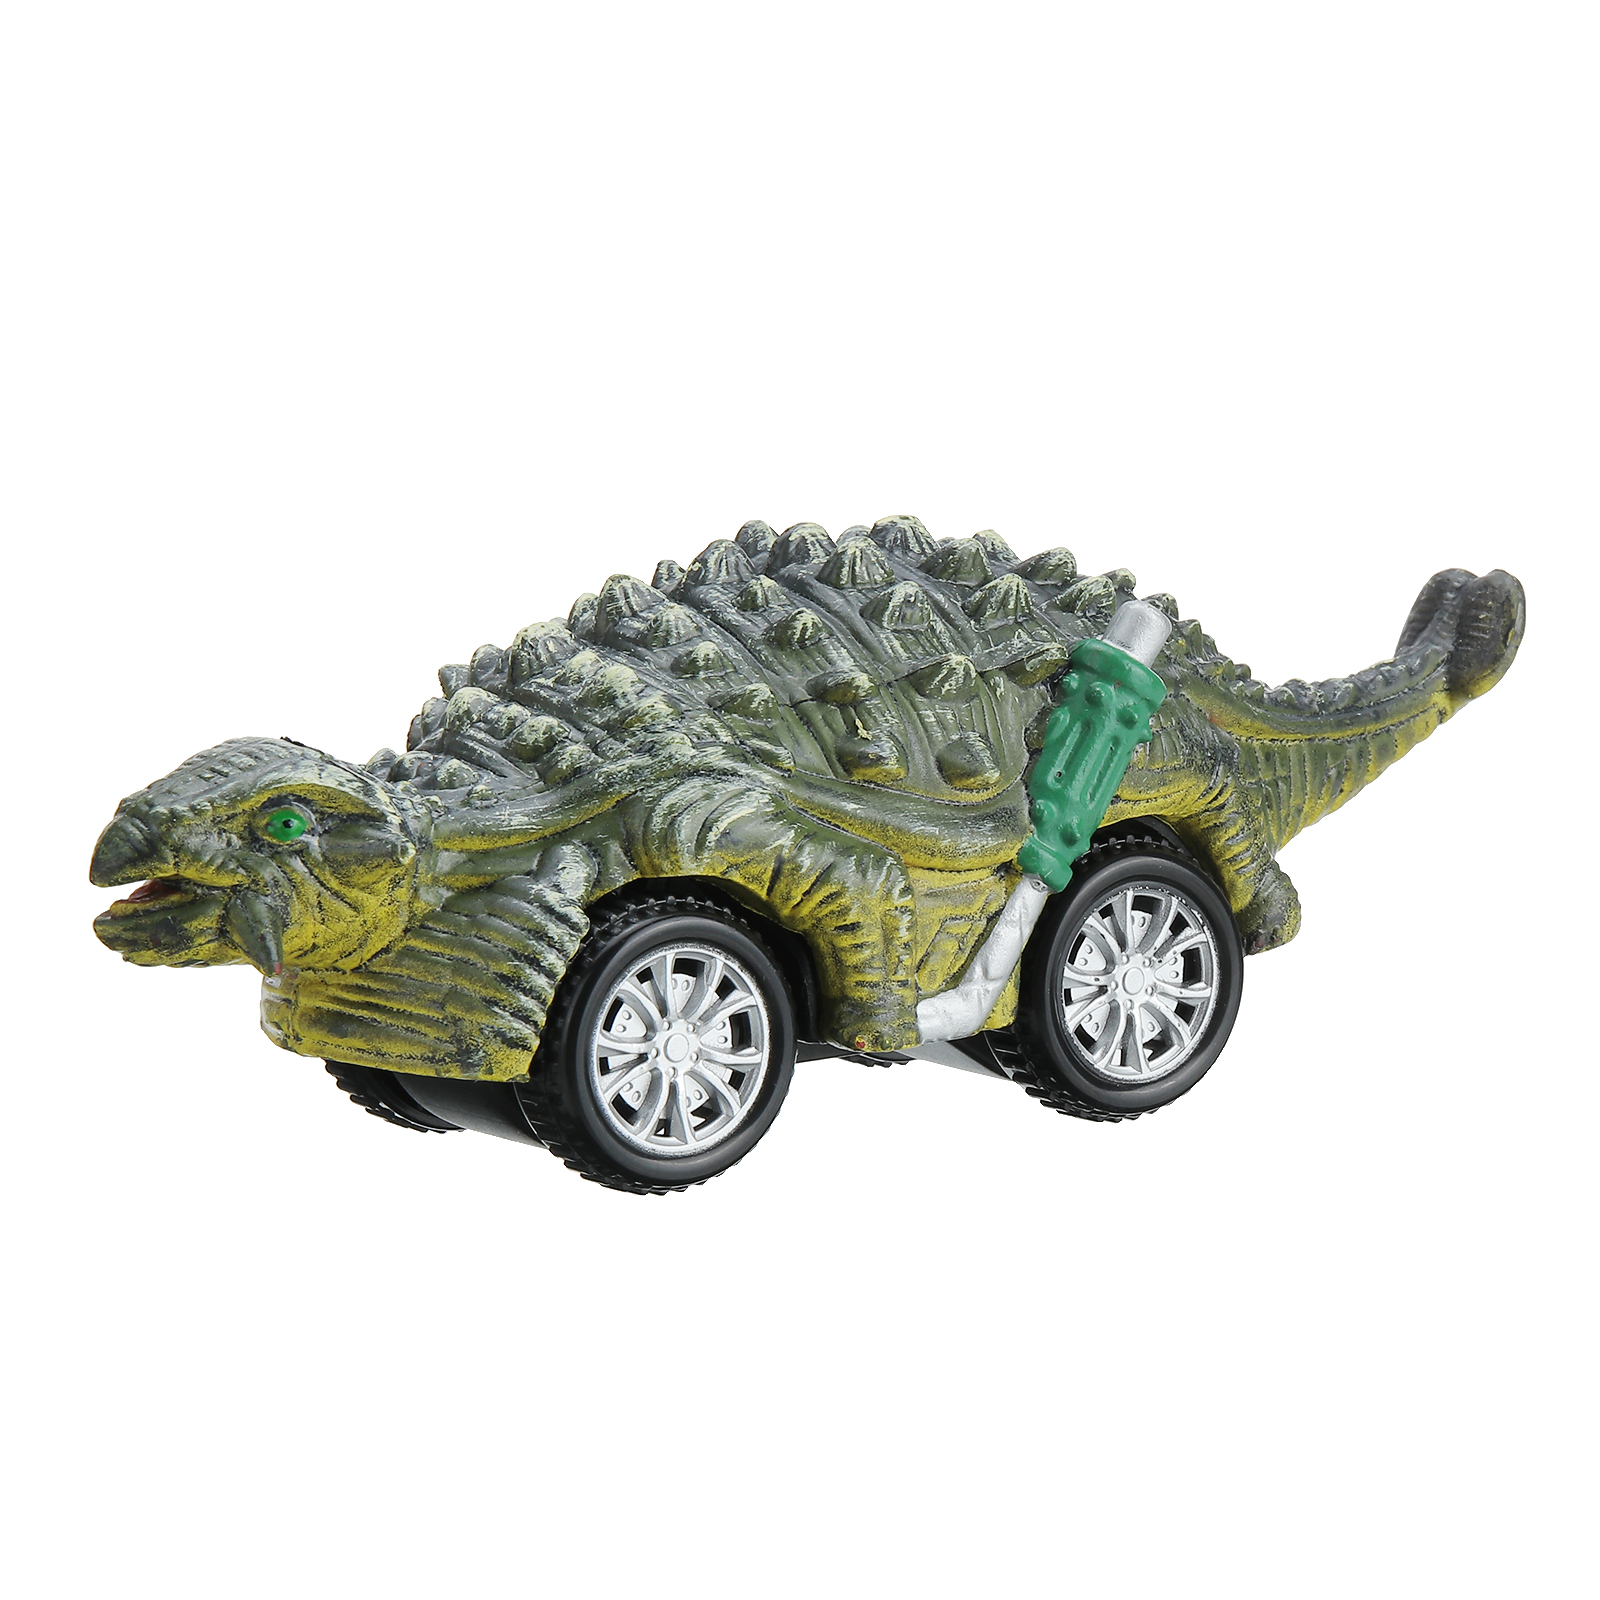 Pickwoo-Dinosaur-Toys-Cars-Inertia-Vehicles-Toddlers-Kids-Dinosaur-Party-Games-with-T-Rex-Dino-Toys--1895631-13